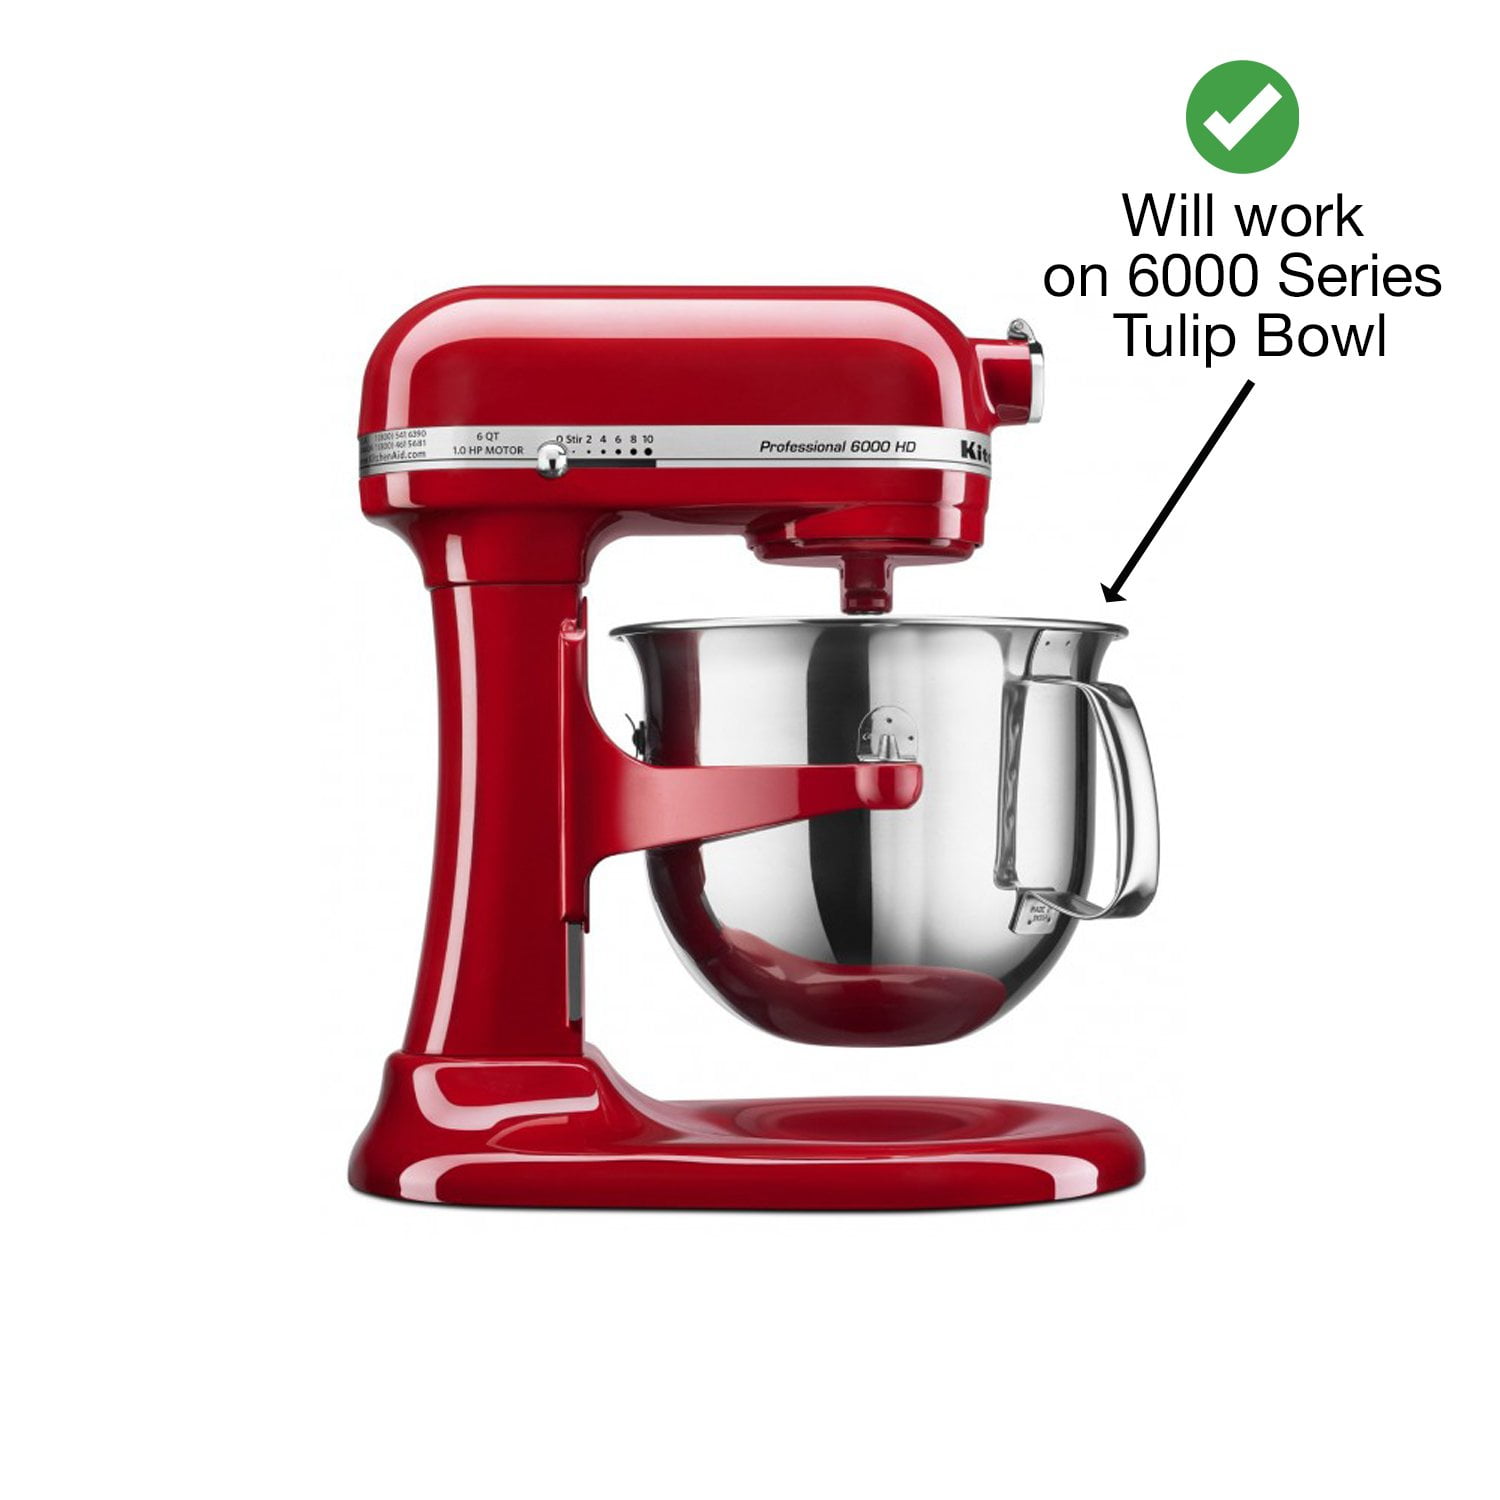  New Metro KA-THR Original Beater Blade Works w/ KitchenAid 4.5  - 5 Qt Tilt-Head Stand Mixers, Red: Electric Mixer Replacement Parts: Home  & Kitchen